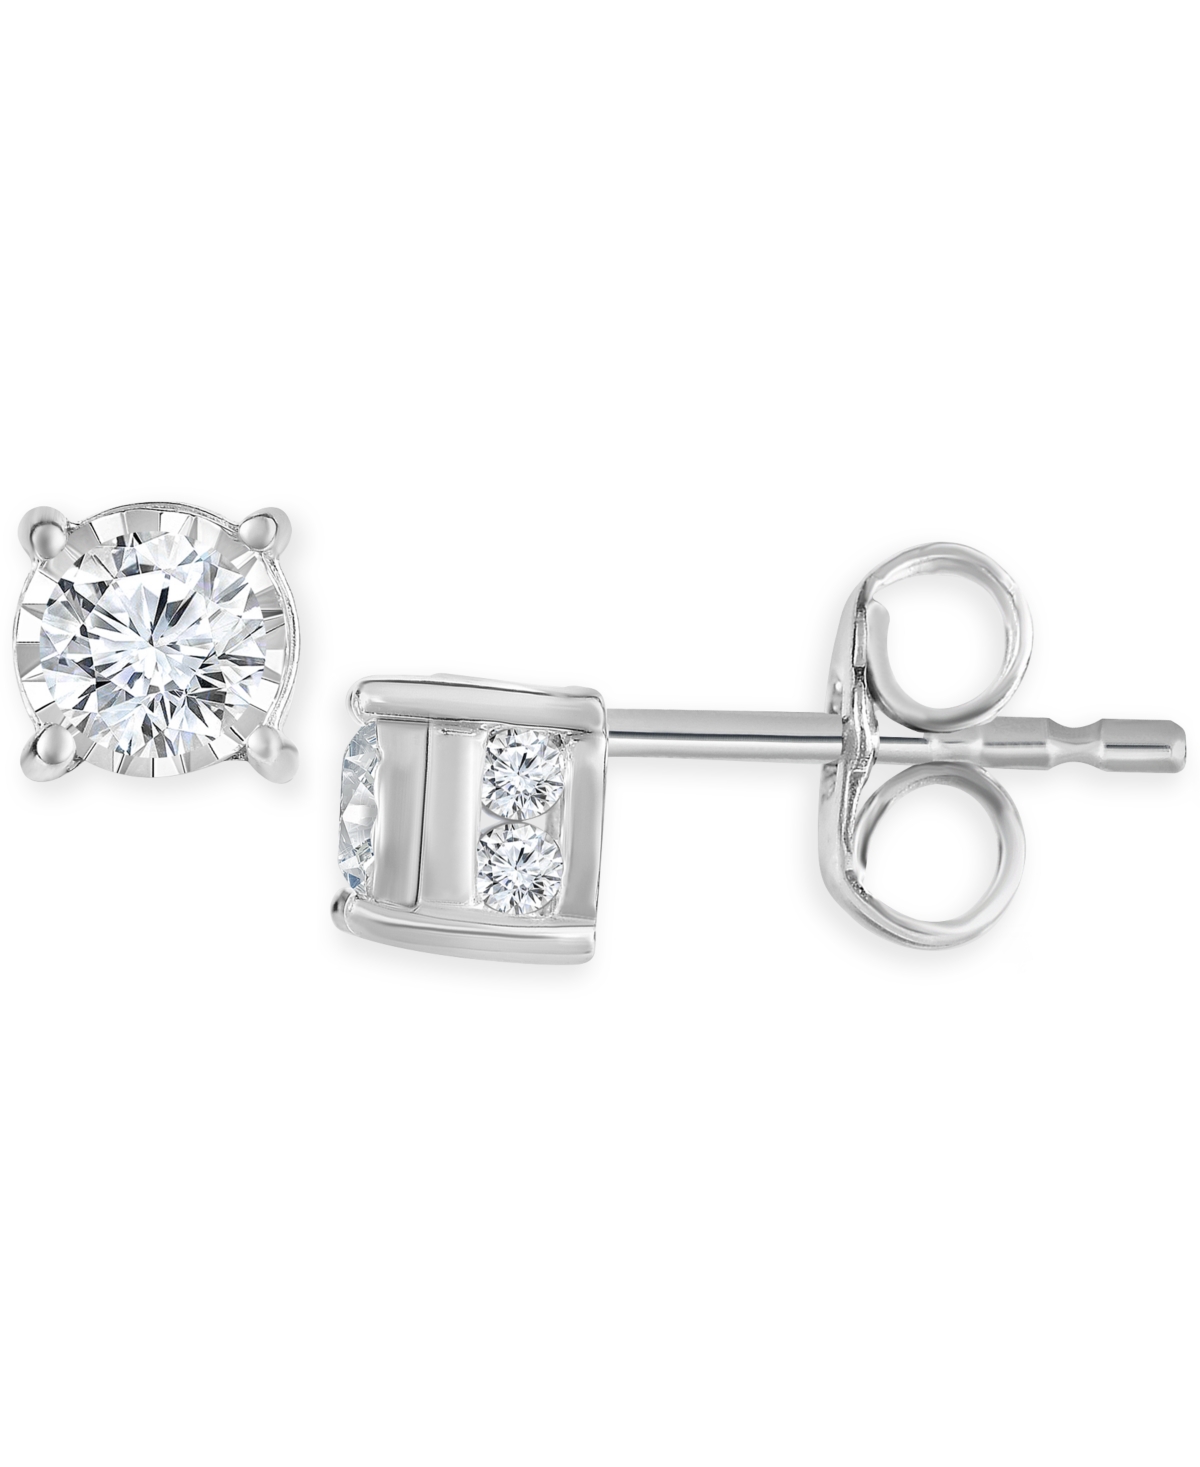 Diamond Stud Earrings (1/2 ct. t.w.) in 14k White, Yellow or Rose Gold - White Gold